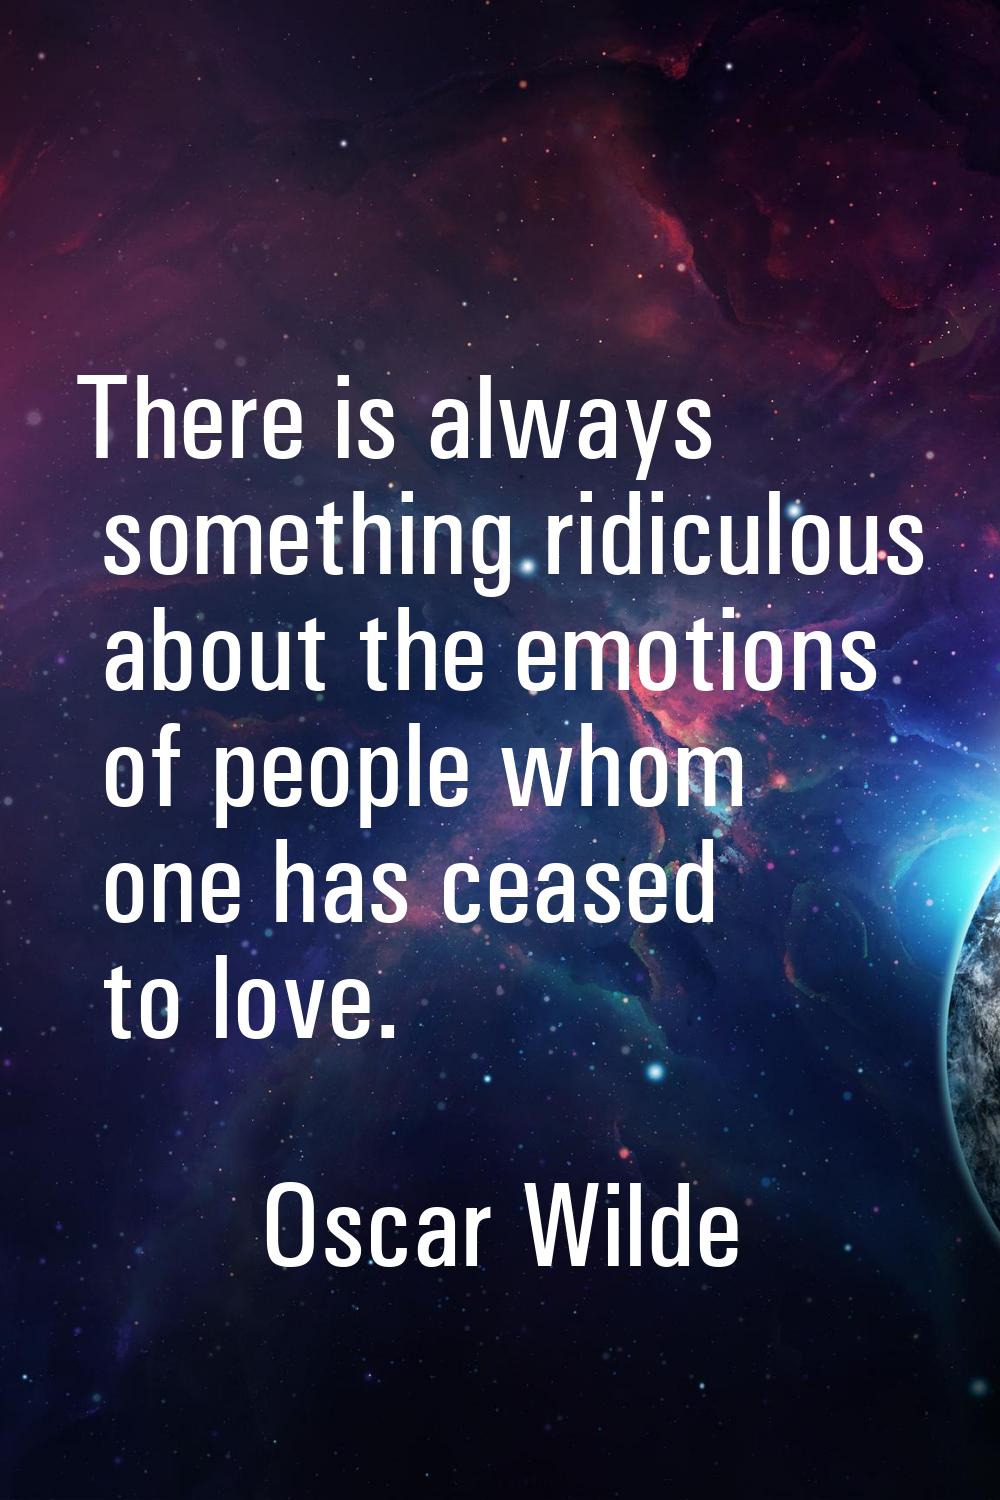 There is always something ridiculous about the emotions of people whom one has ceased to love.